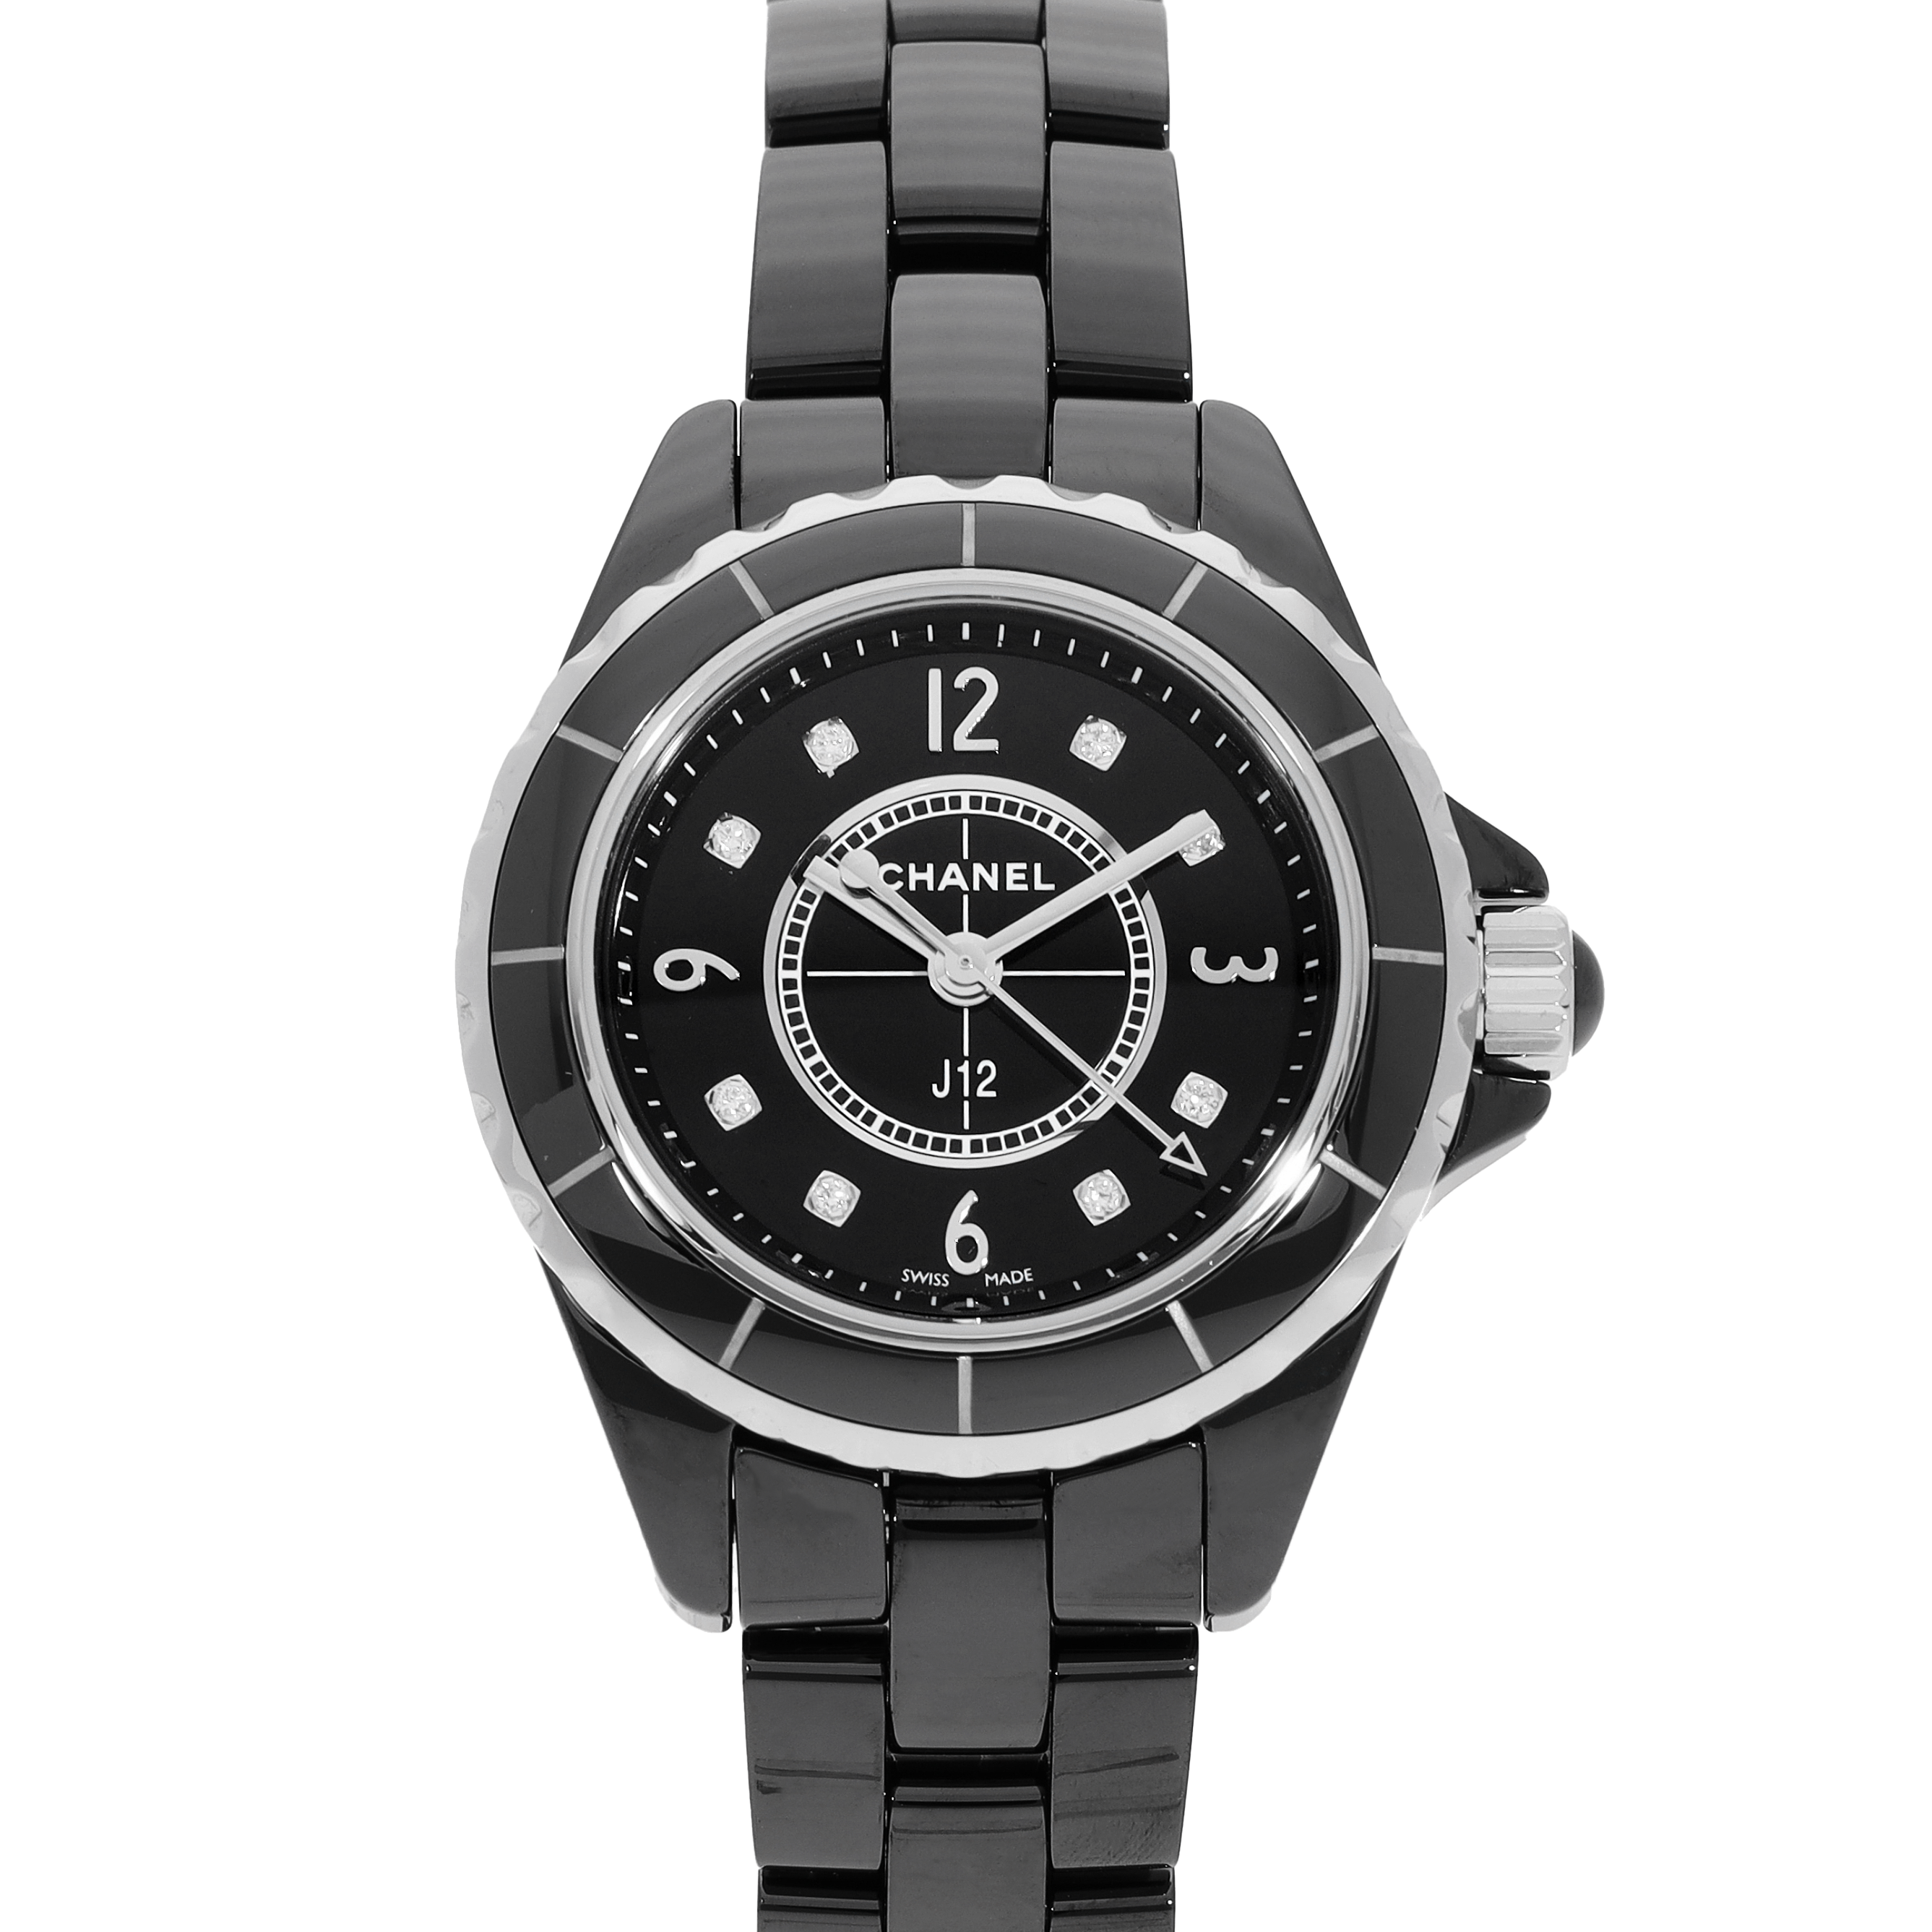 Buy Chanel watches | Authenticity | CHRONEXT